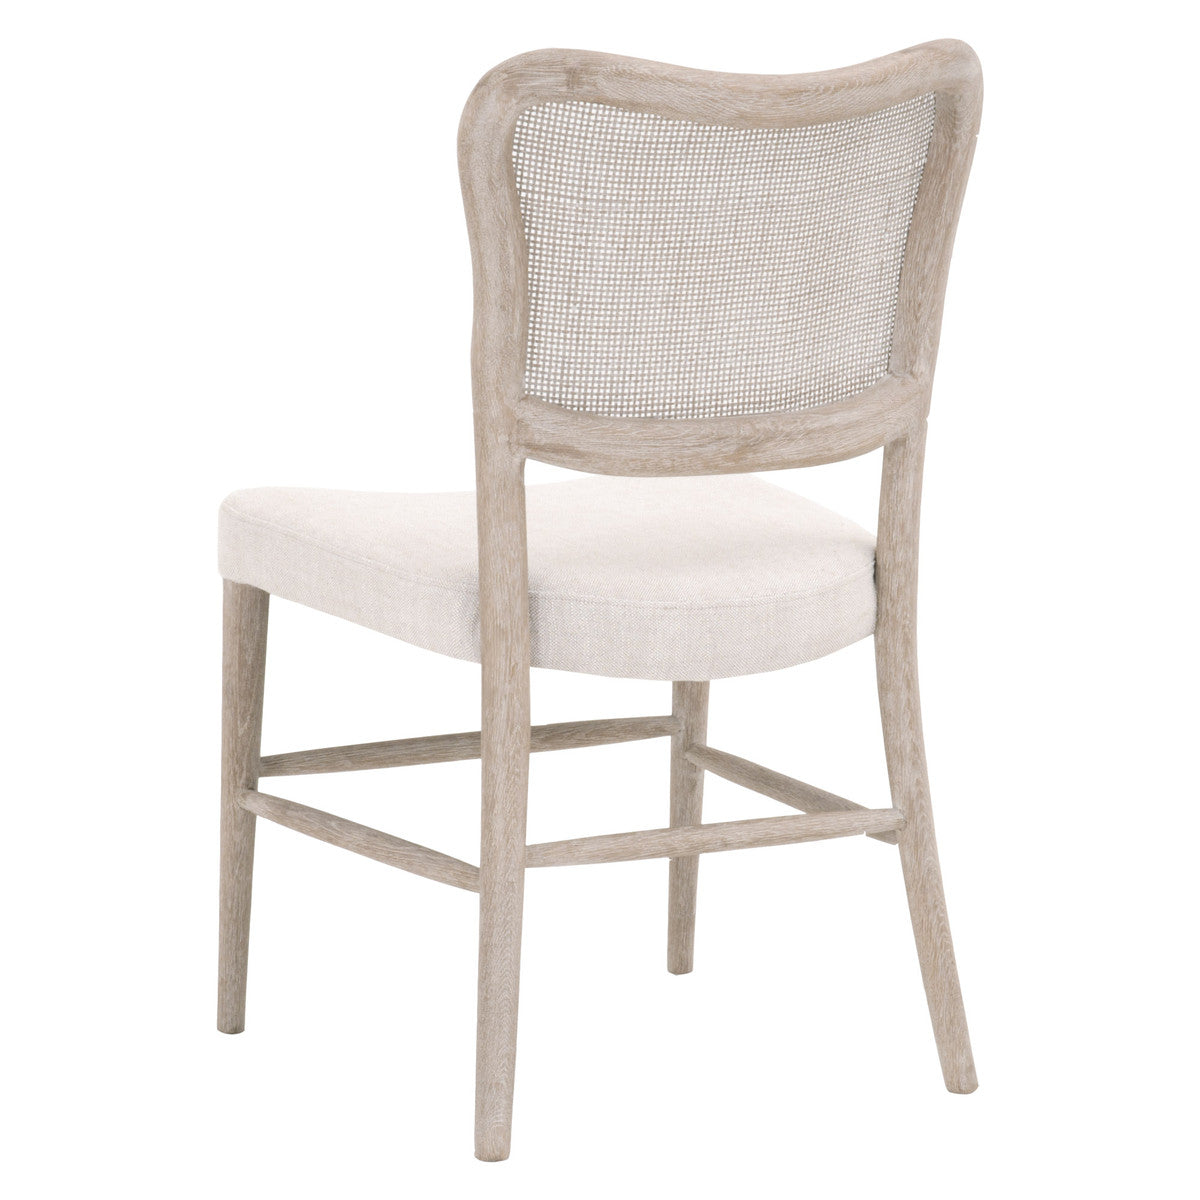 Celine Dining Chair - Set of (2)